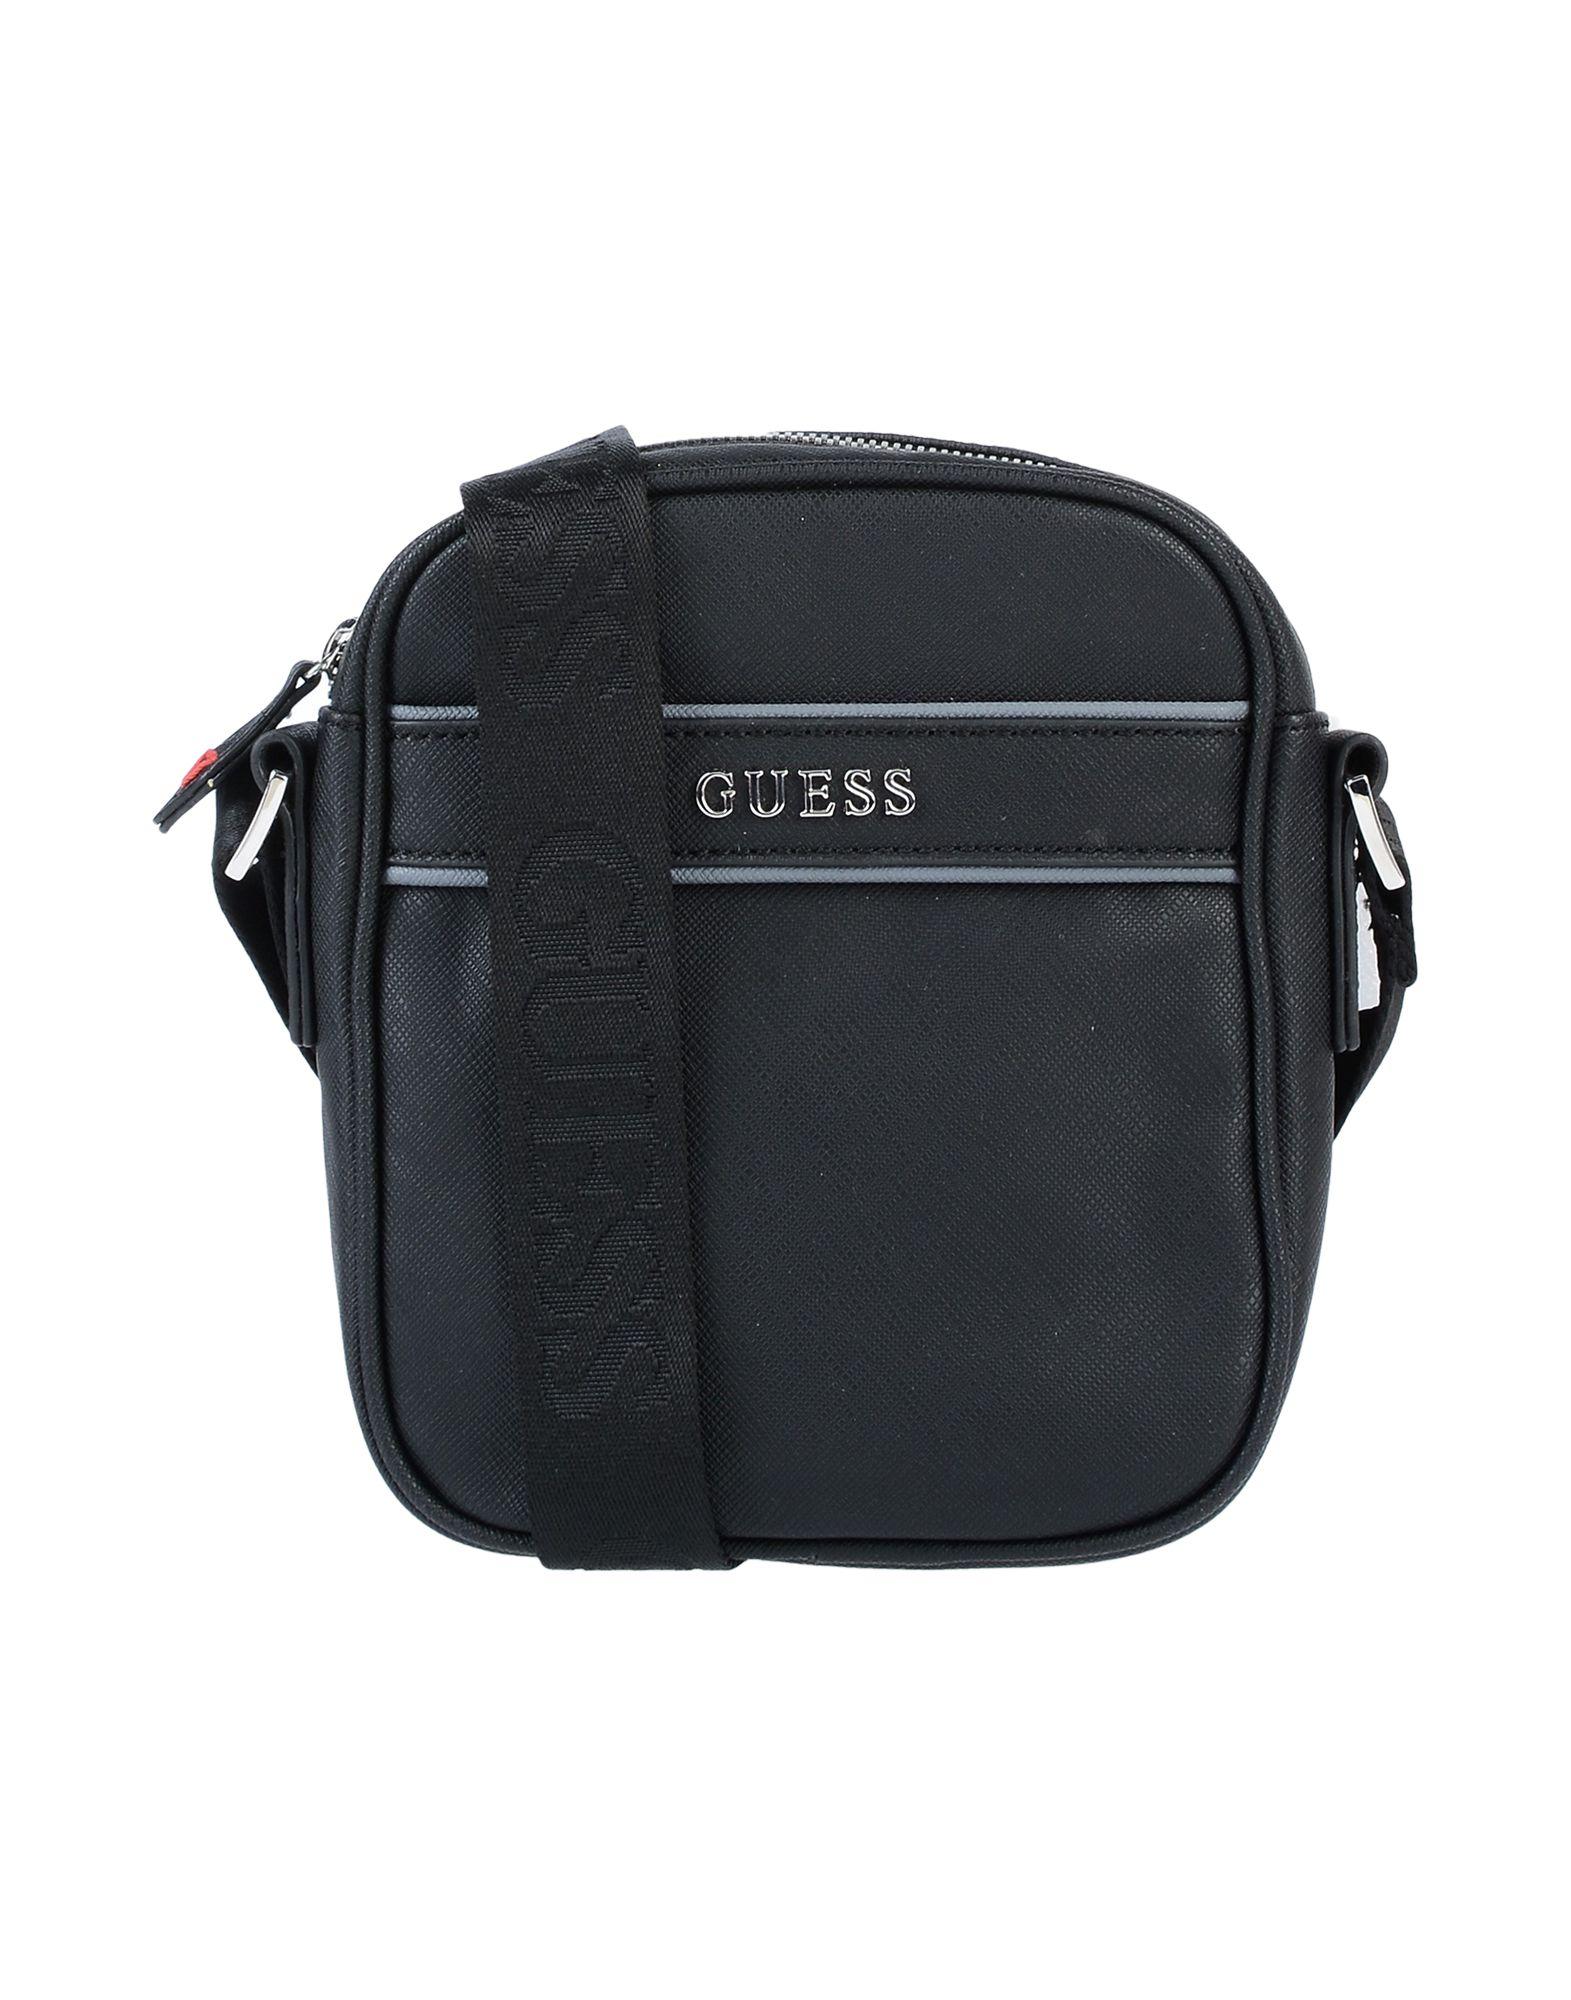 Guess Synthetic Cross-body Bag in Black for Men - Lyst